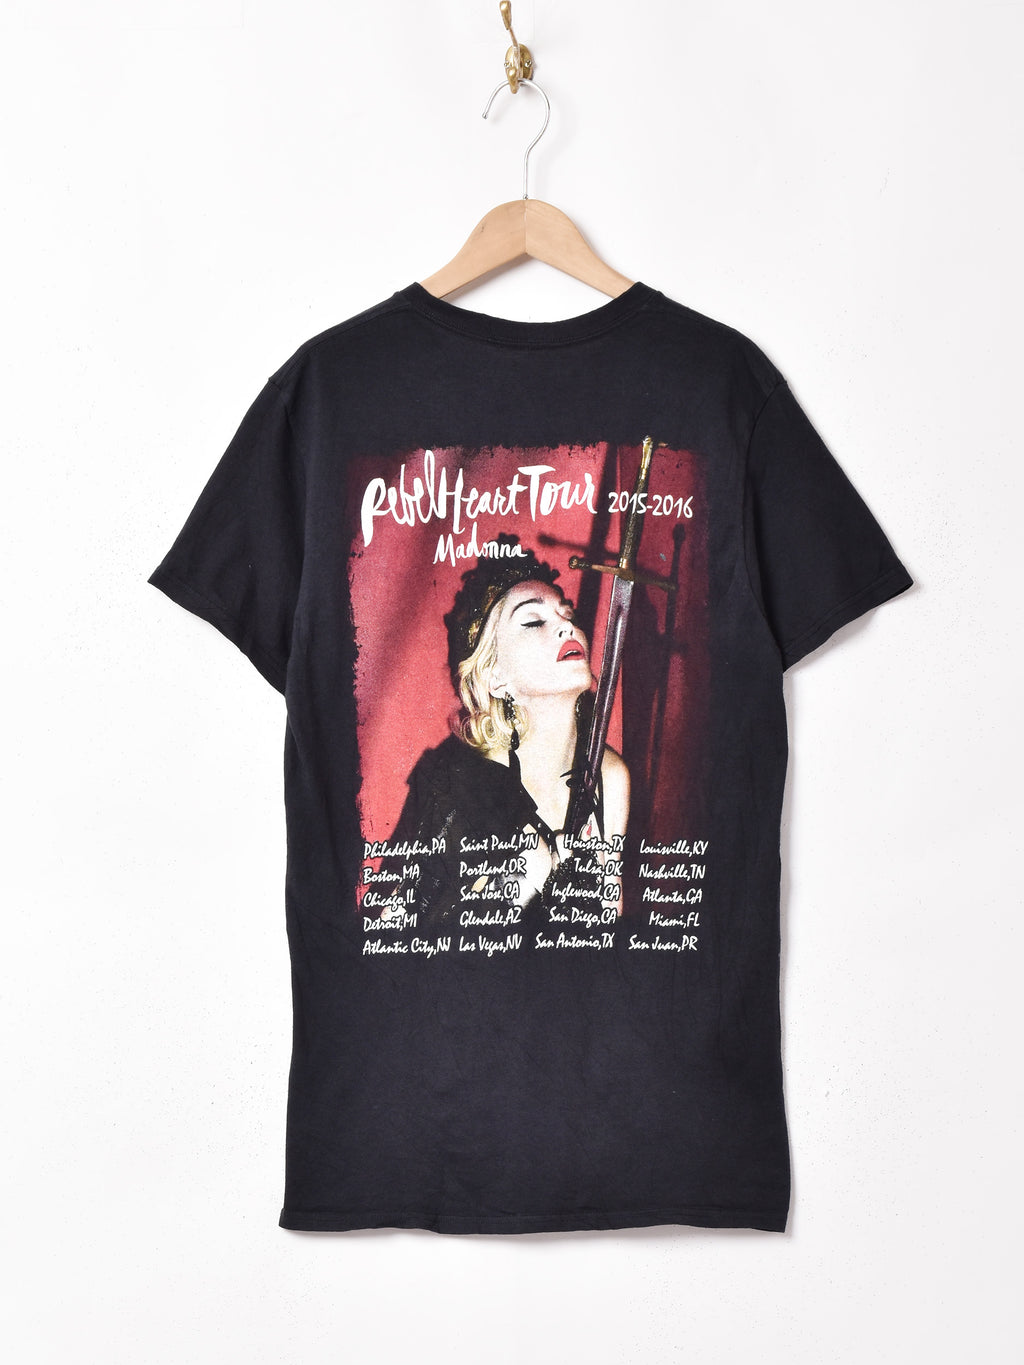 Madonna ツアーTシャツ – 古着屋Top of the Hillのネット通販サイト